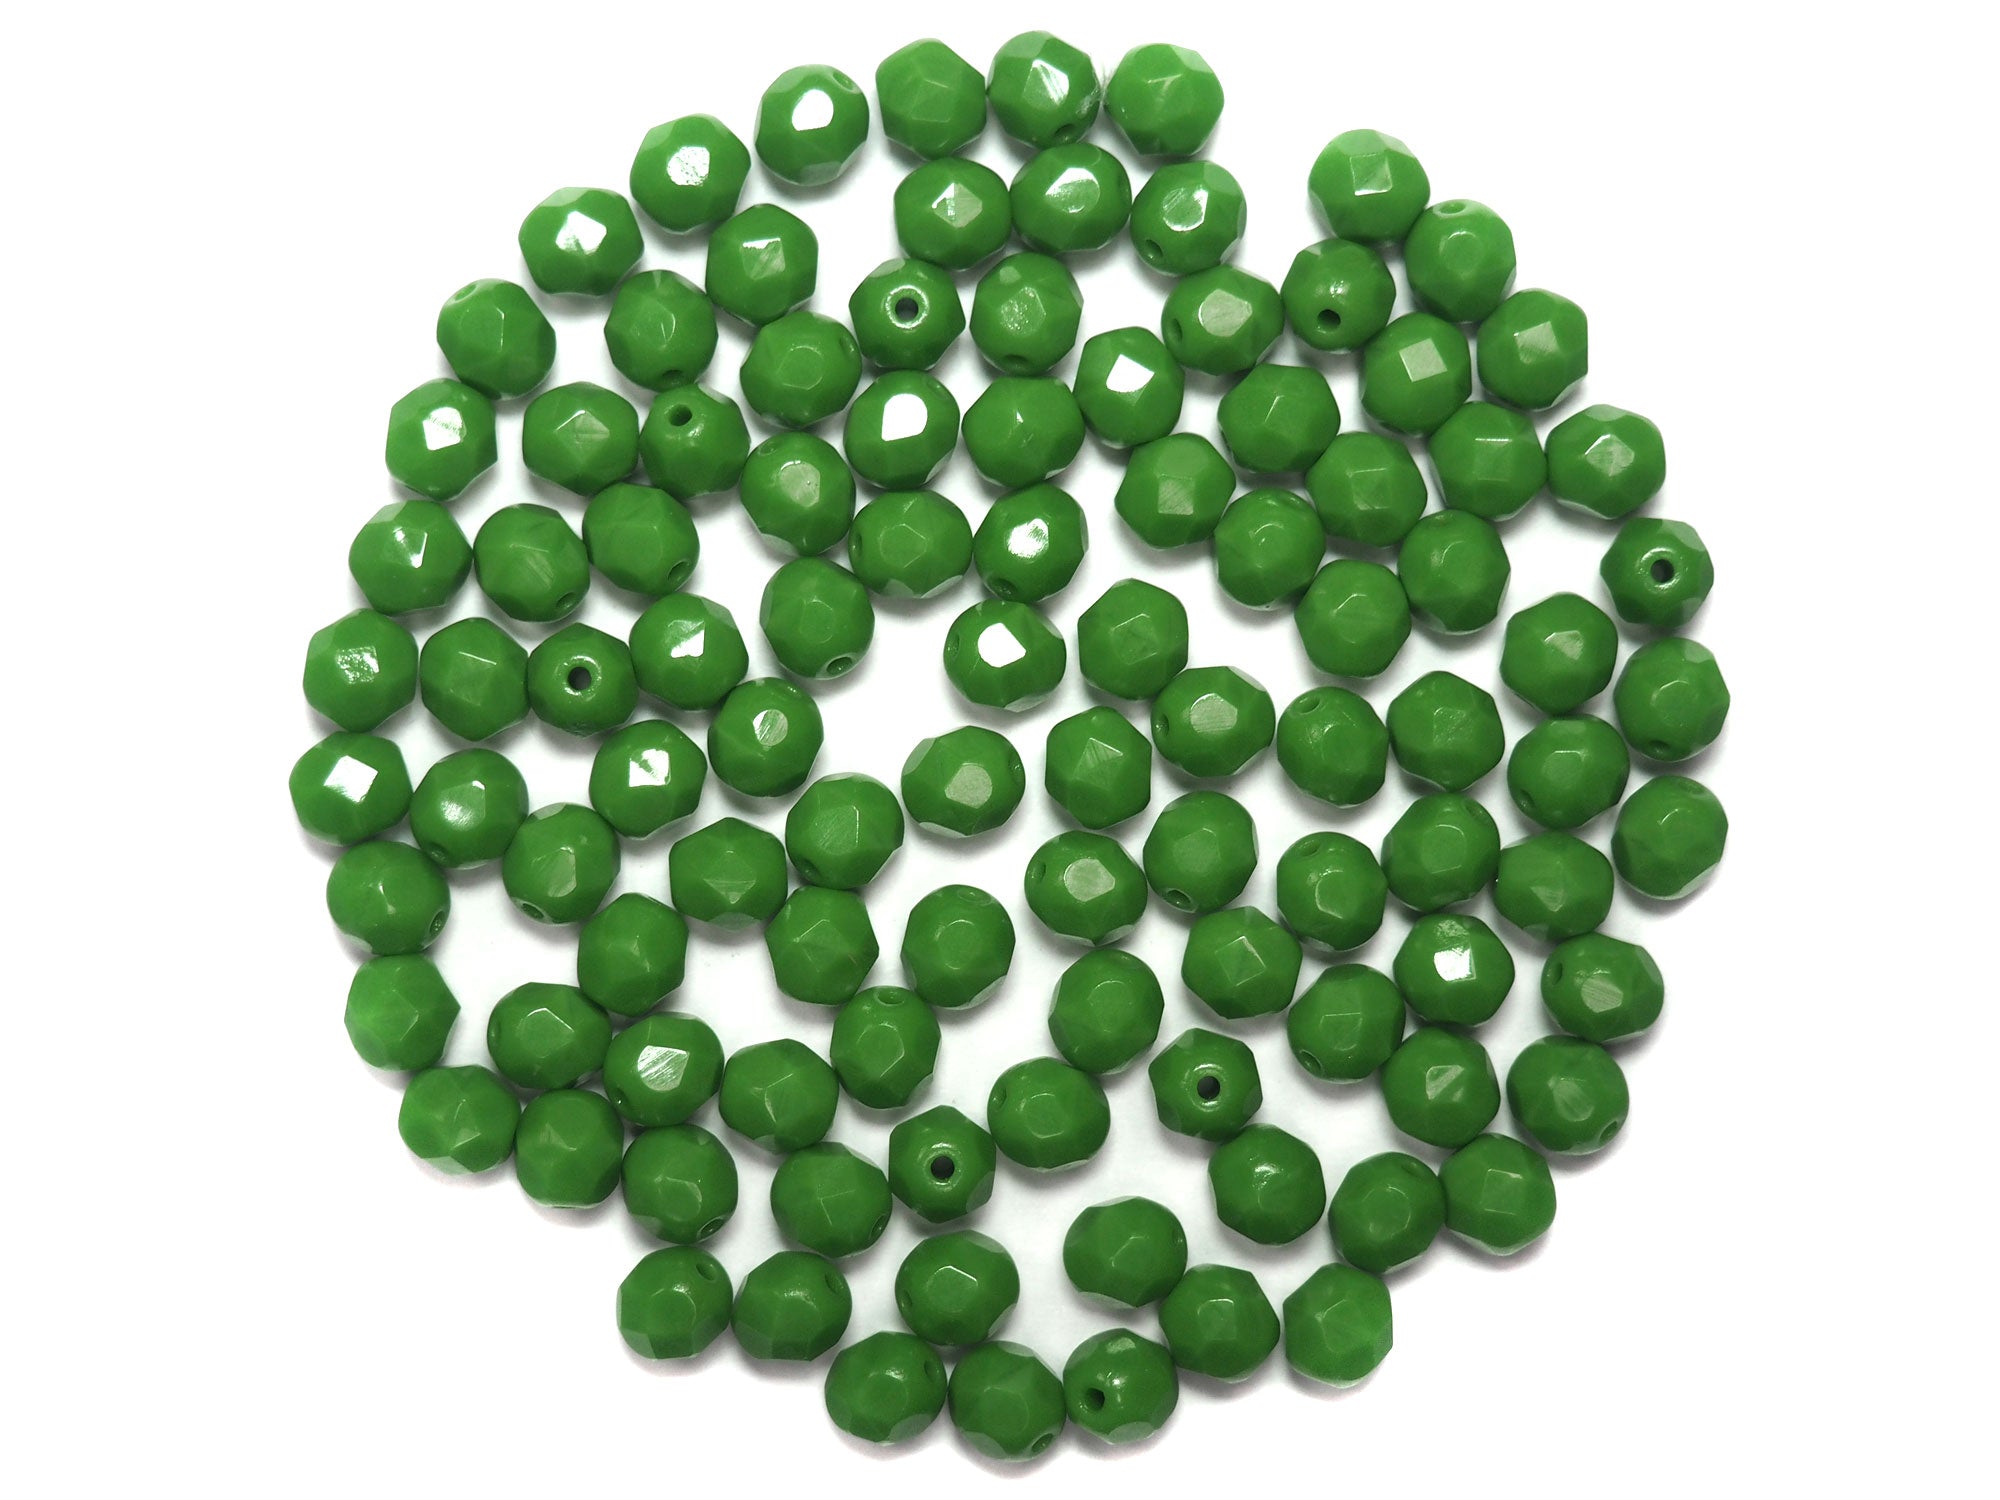 Apple Green Opaque, Czech Fire Polished Round Faceted Glass Beads, 6mm 60pcs, P488